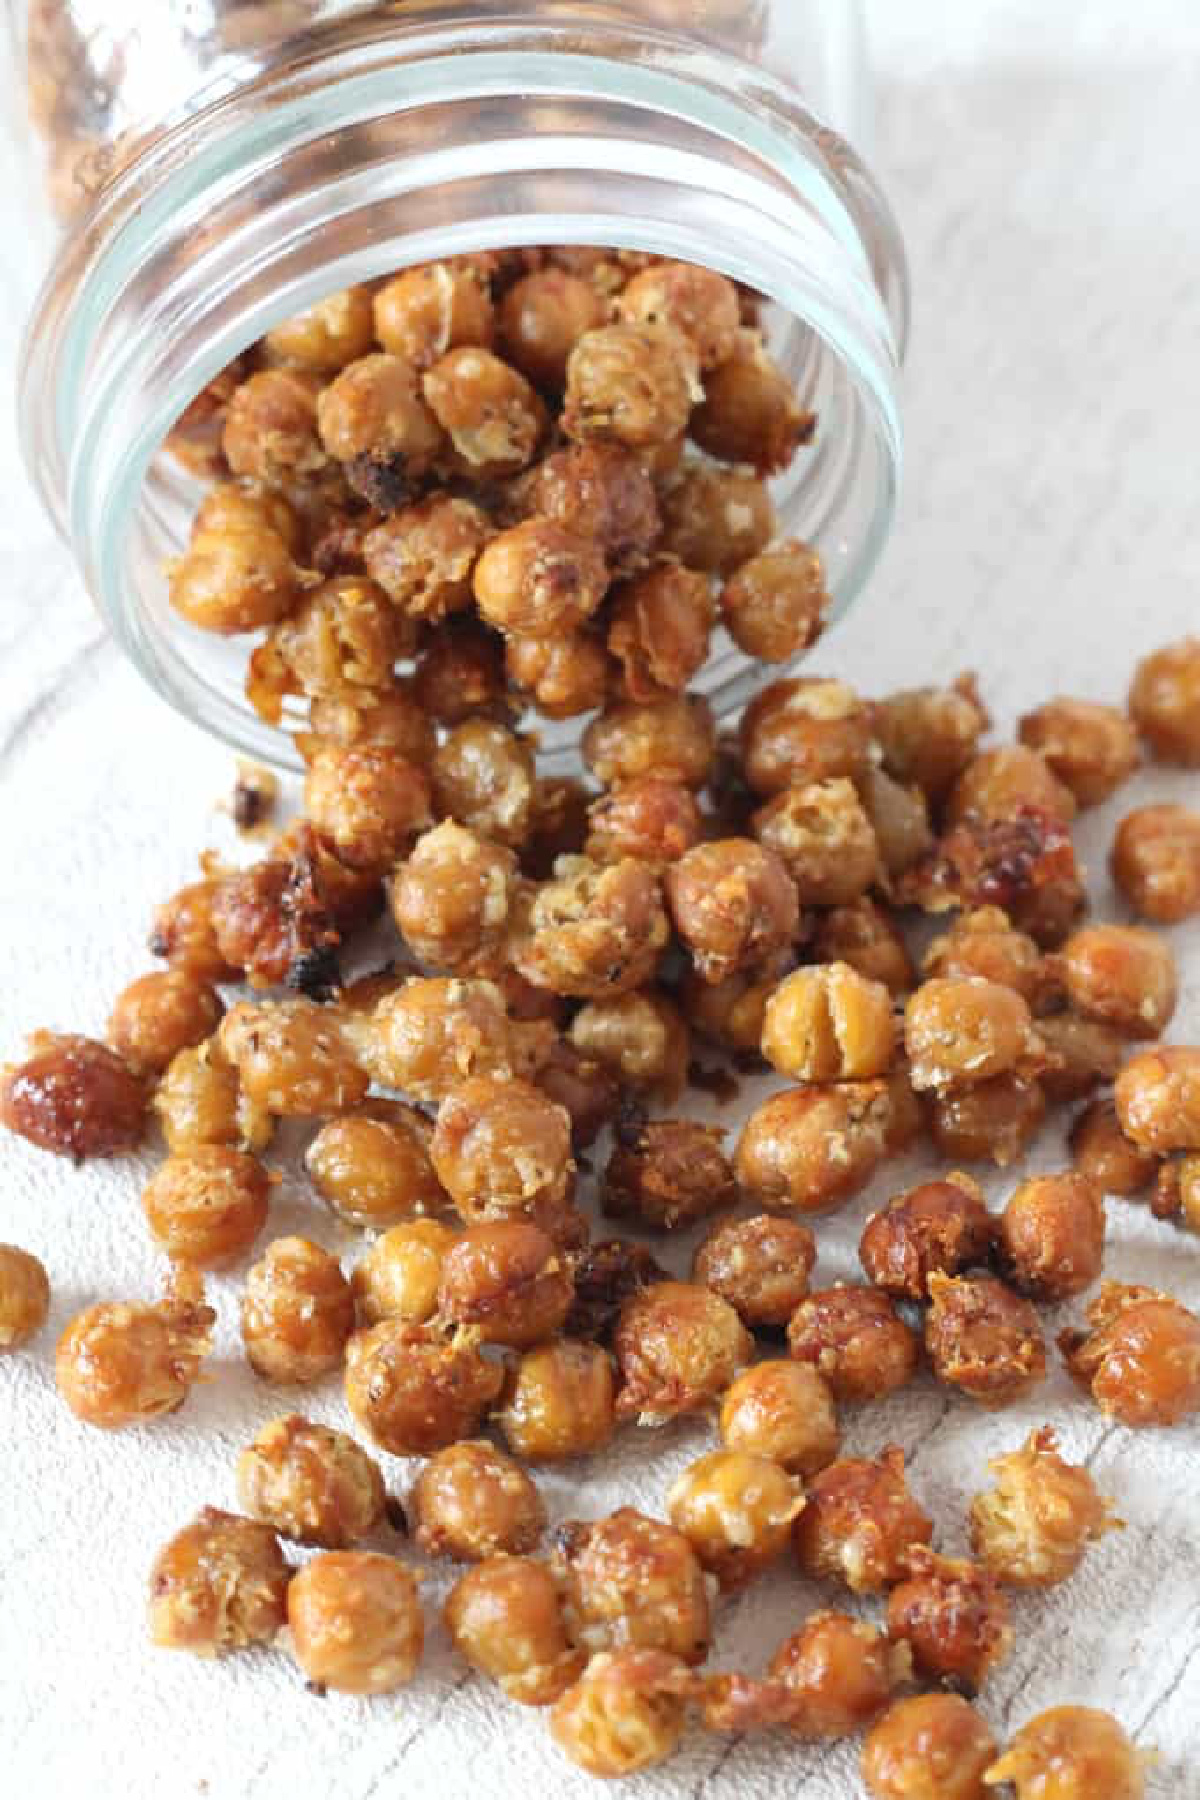 Cheap Party Food Ideas - Garlic Parmesan Roasted Chickpeas